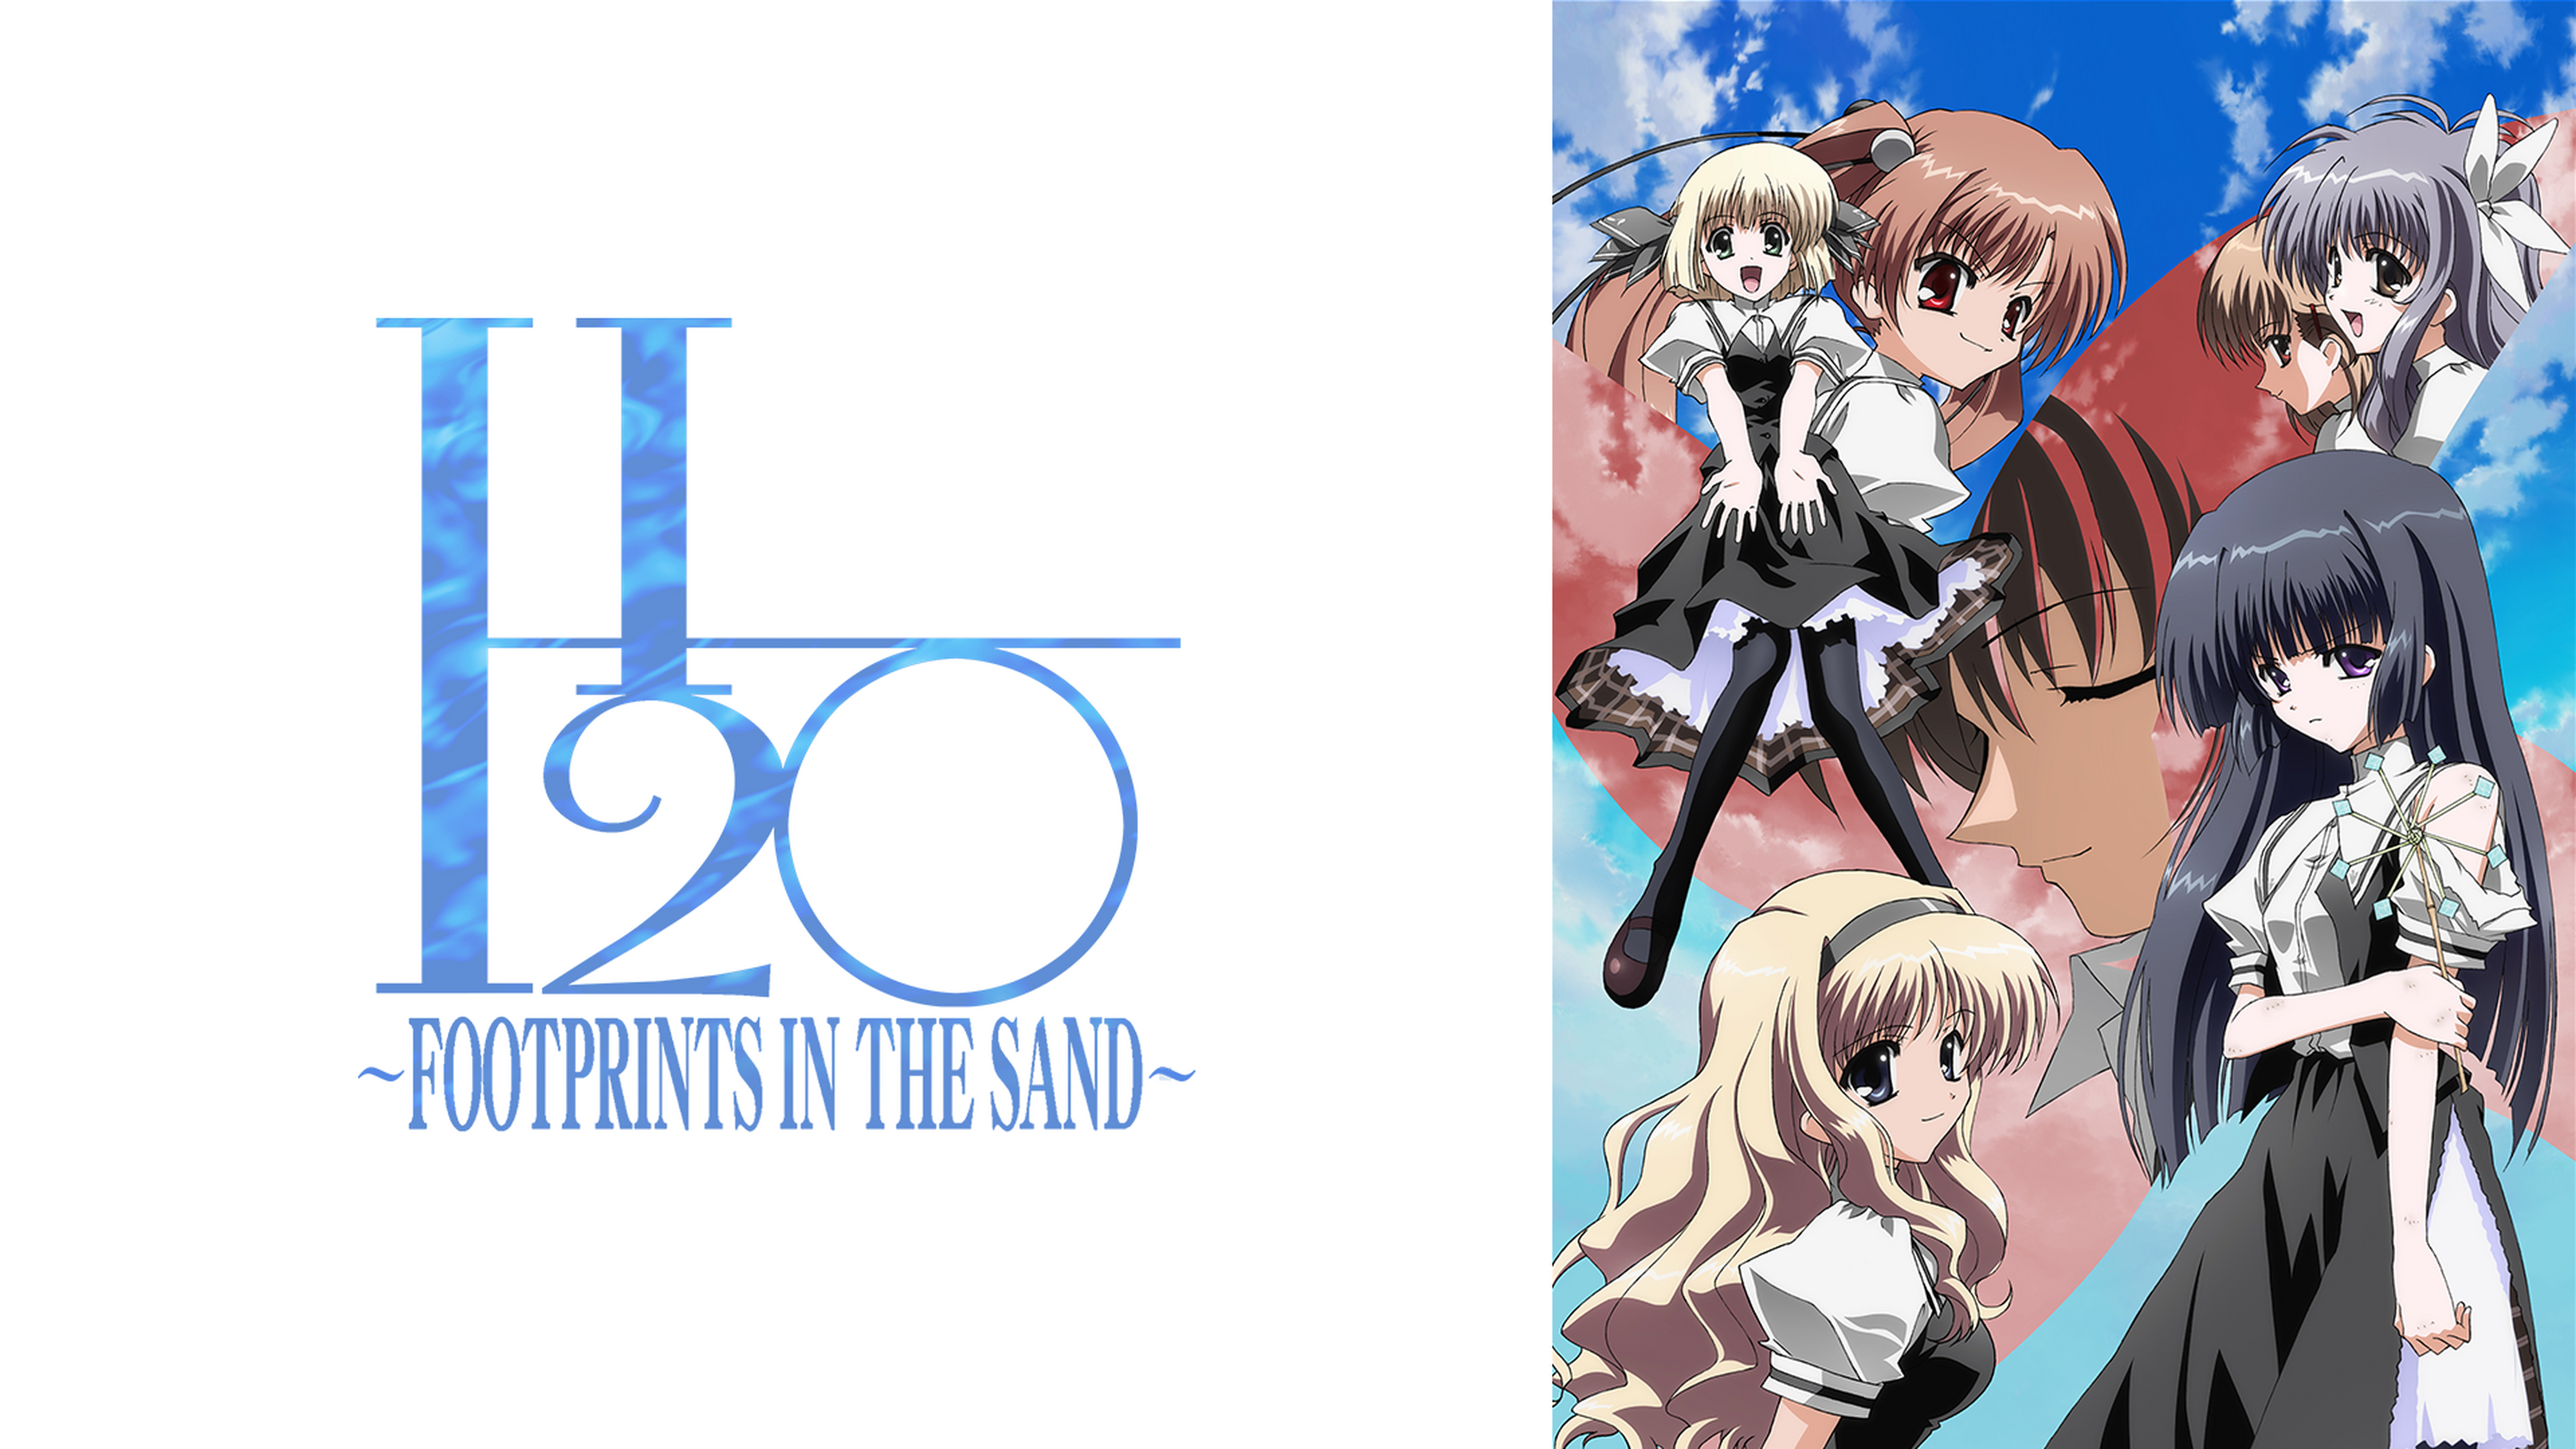 H2o Footprints In The Sand の動画視聴 あらすじ U Next